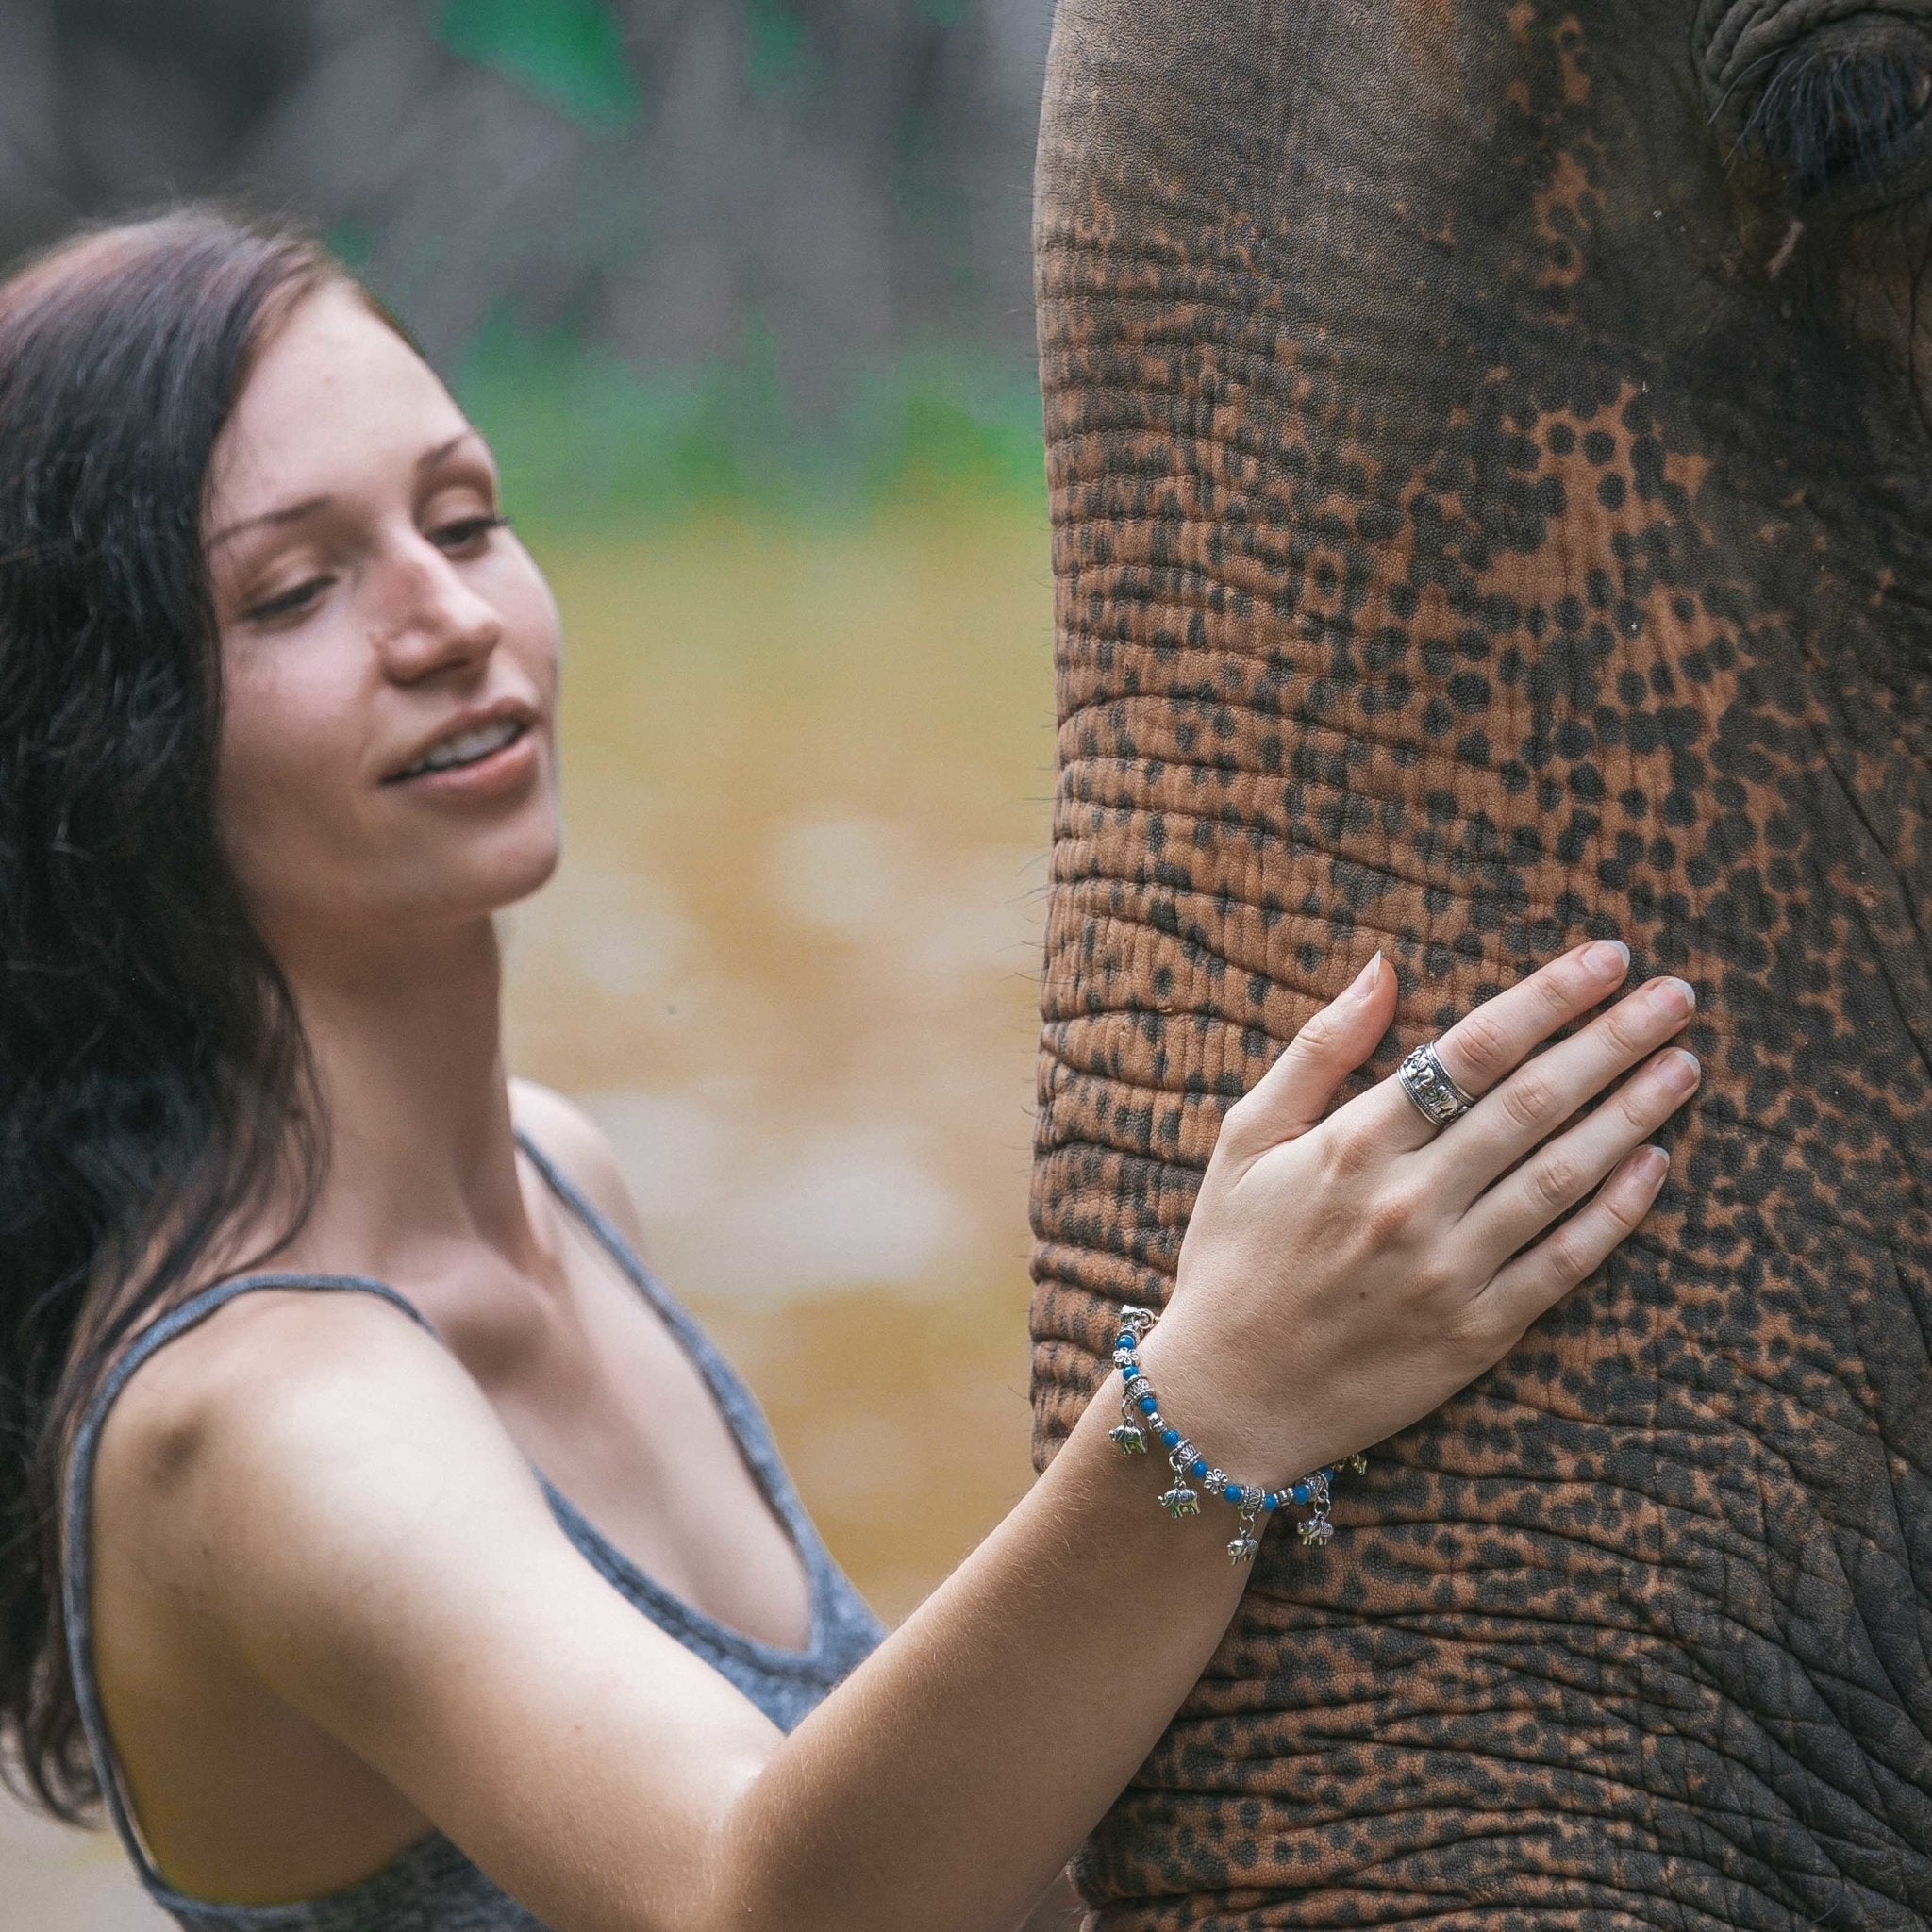 ANGKOR ELEPHANT RING Elepanta Rings - Buy Today Elephant Pants Jewelry And Bohemian Clothes Handmade In Thailand Help To Save The Elephants FairTrade And Vegan